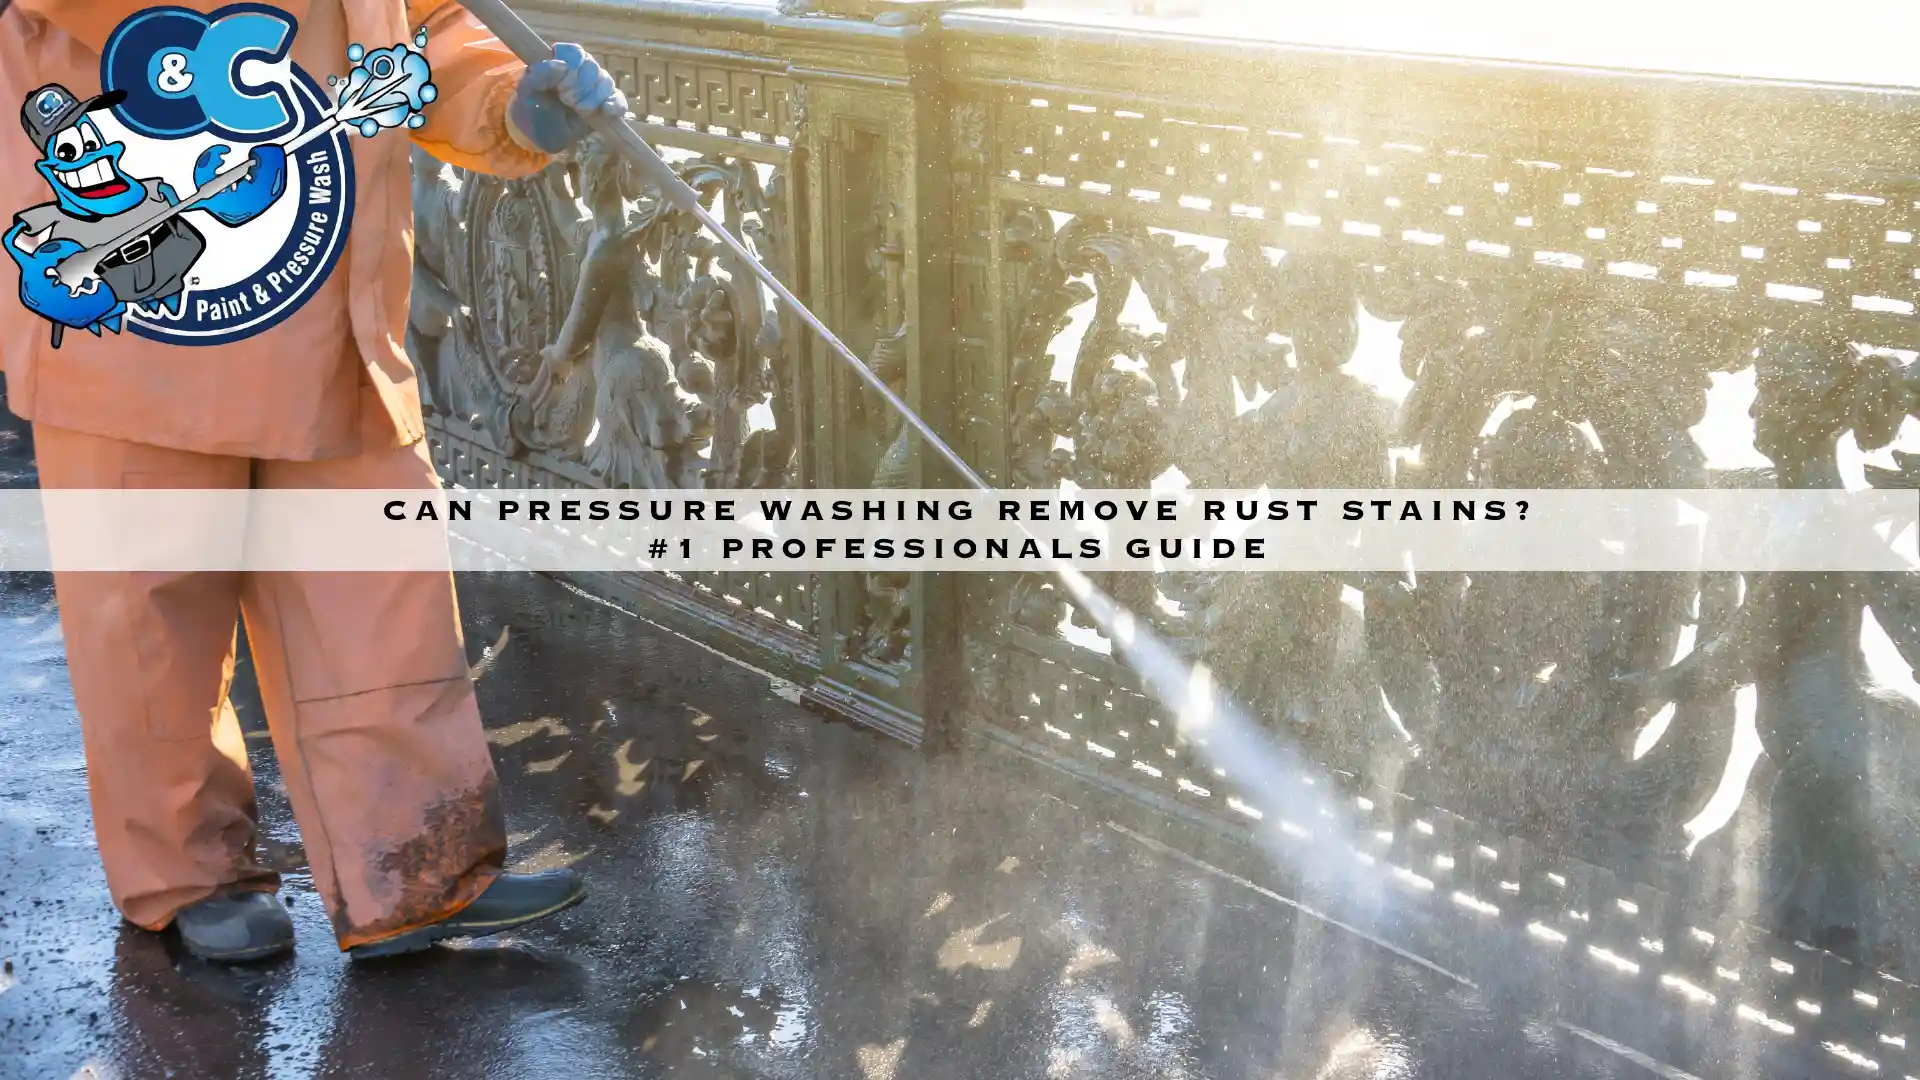 Can Pressure Washing Remove Rust Stains? #1 Professionals Guide